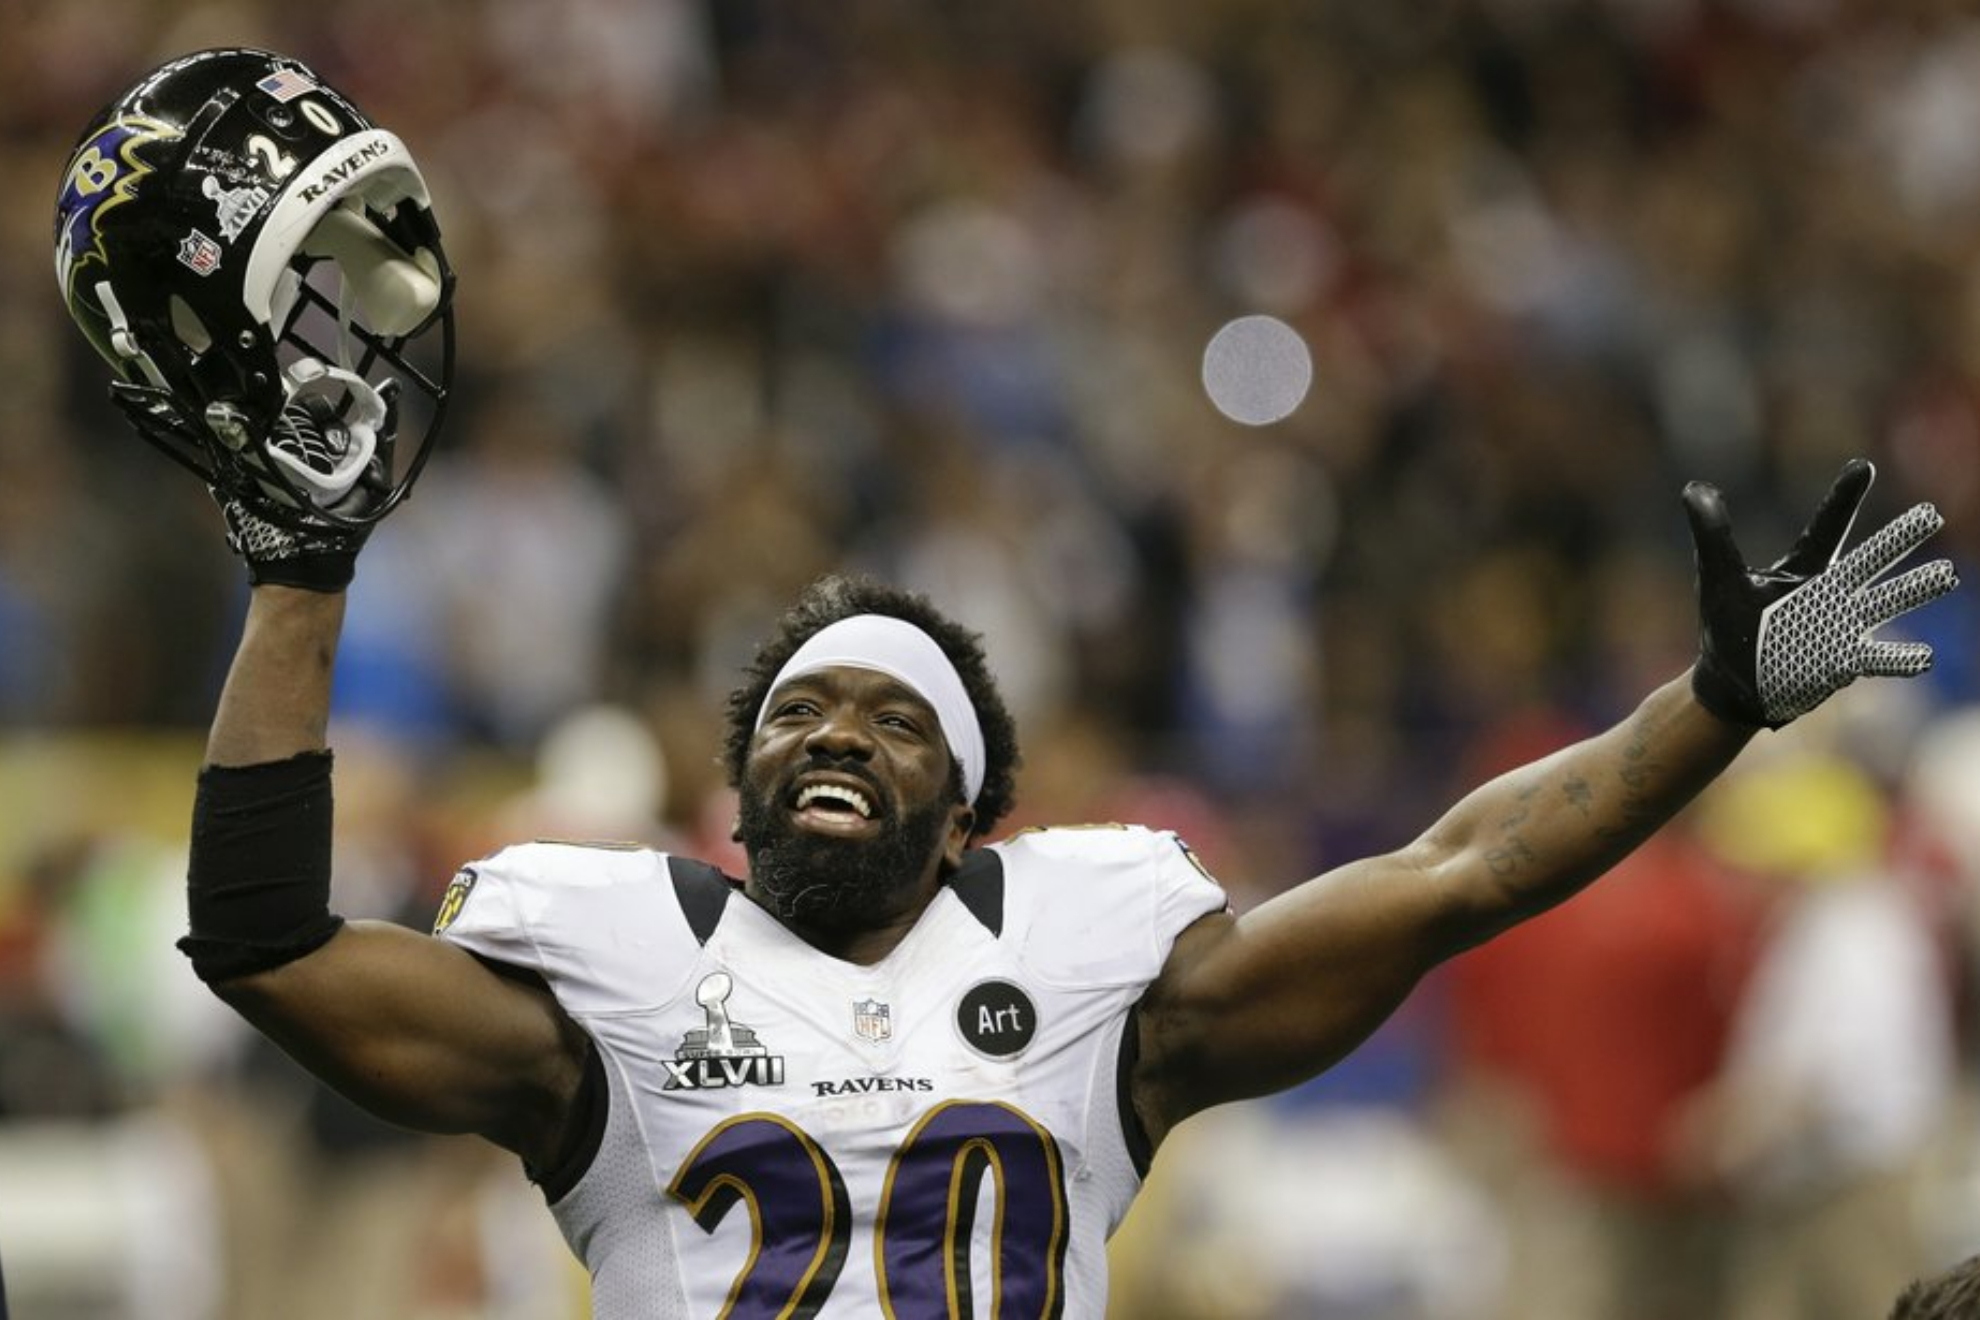 Ed Reed will try to emulate Deion Sanders' success at Jackson State.